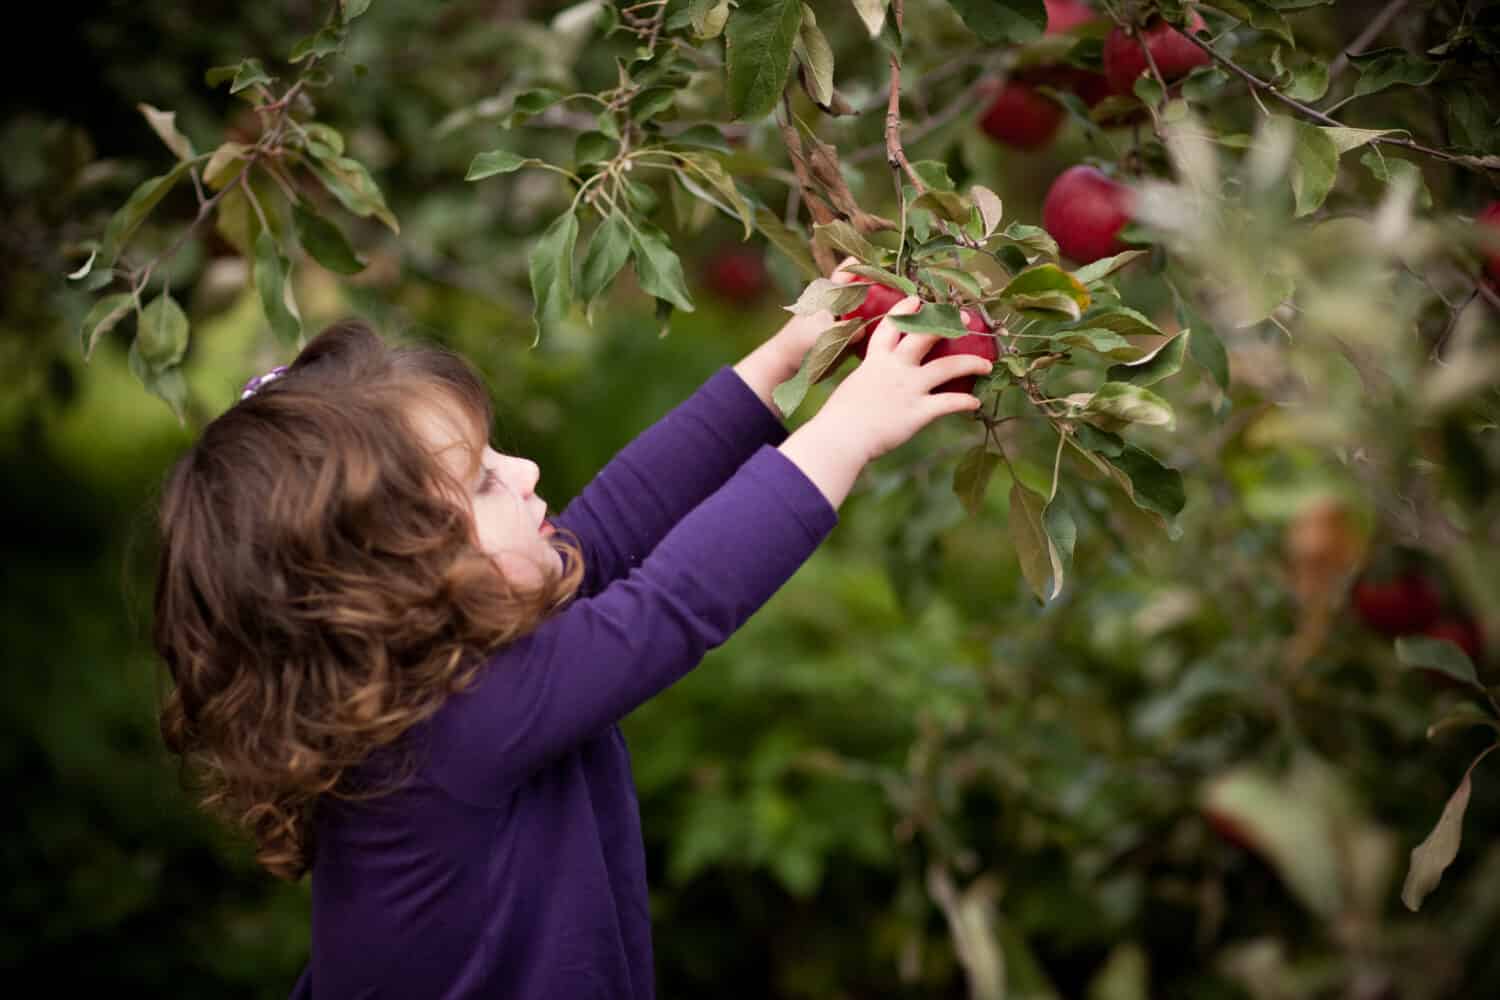 Little Girl Picking Apples in Orchard